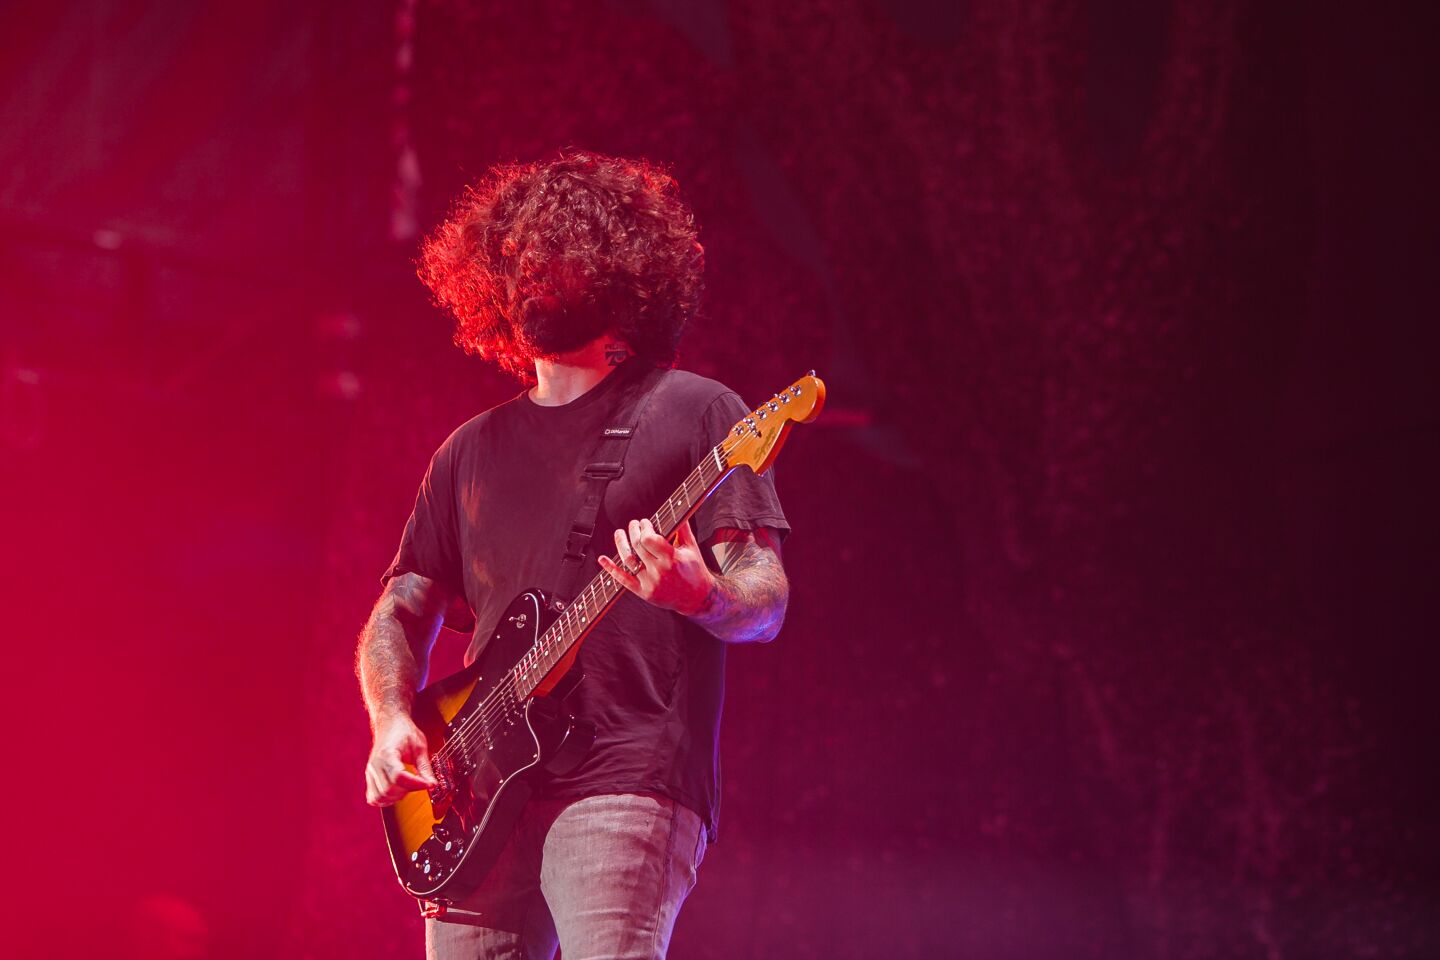 Guitarist, Joseph Mark Trohman of Fall Out Boy during the Hella Mega Tour at Petco Park in downtown San Diego on August 29, 2021.